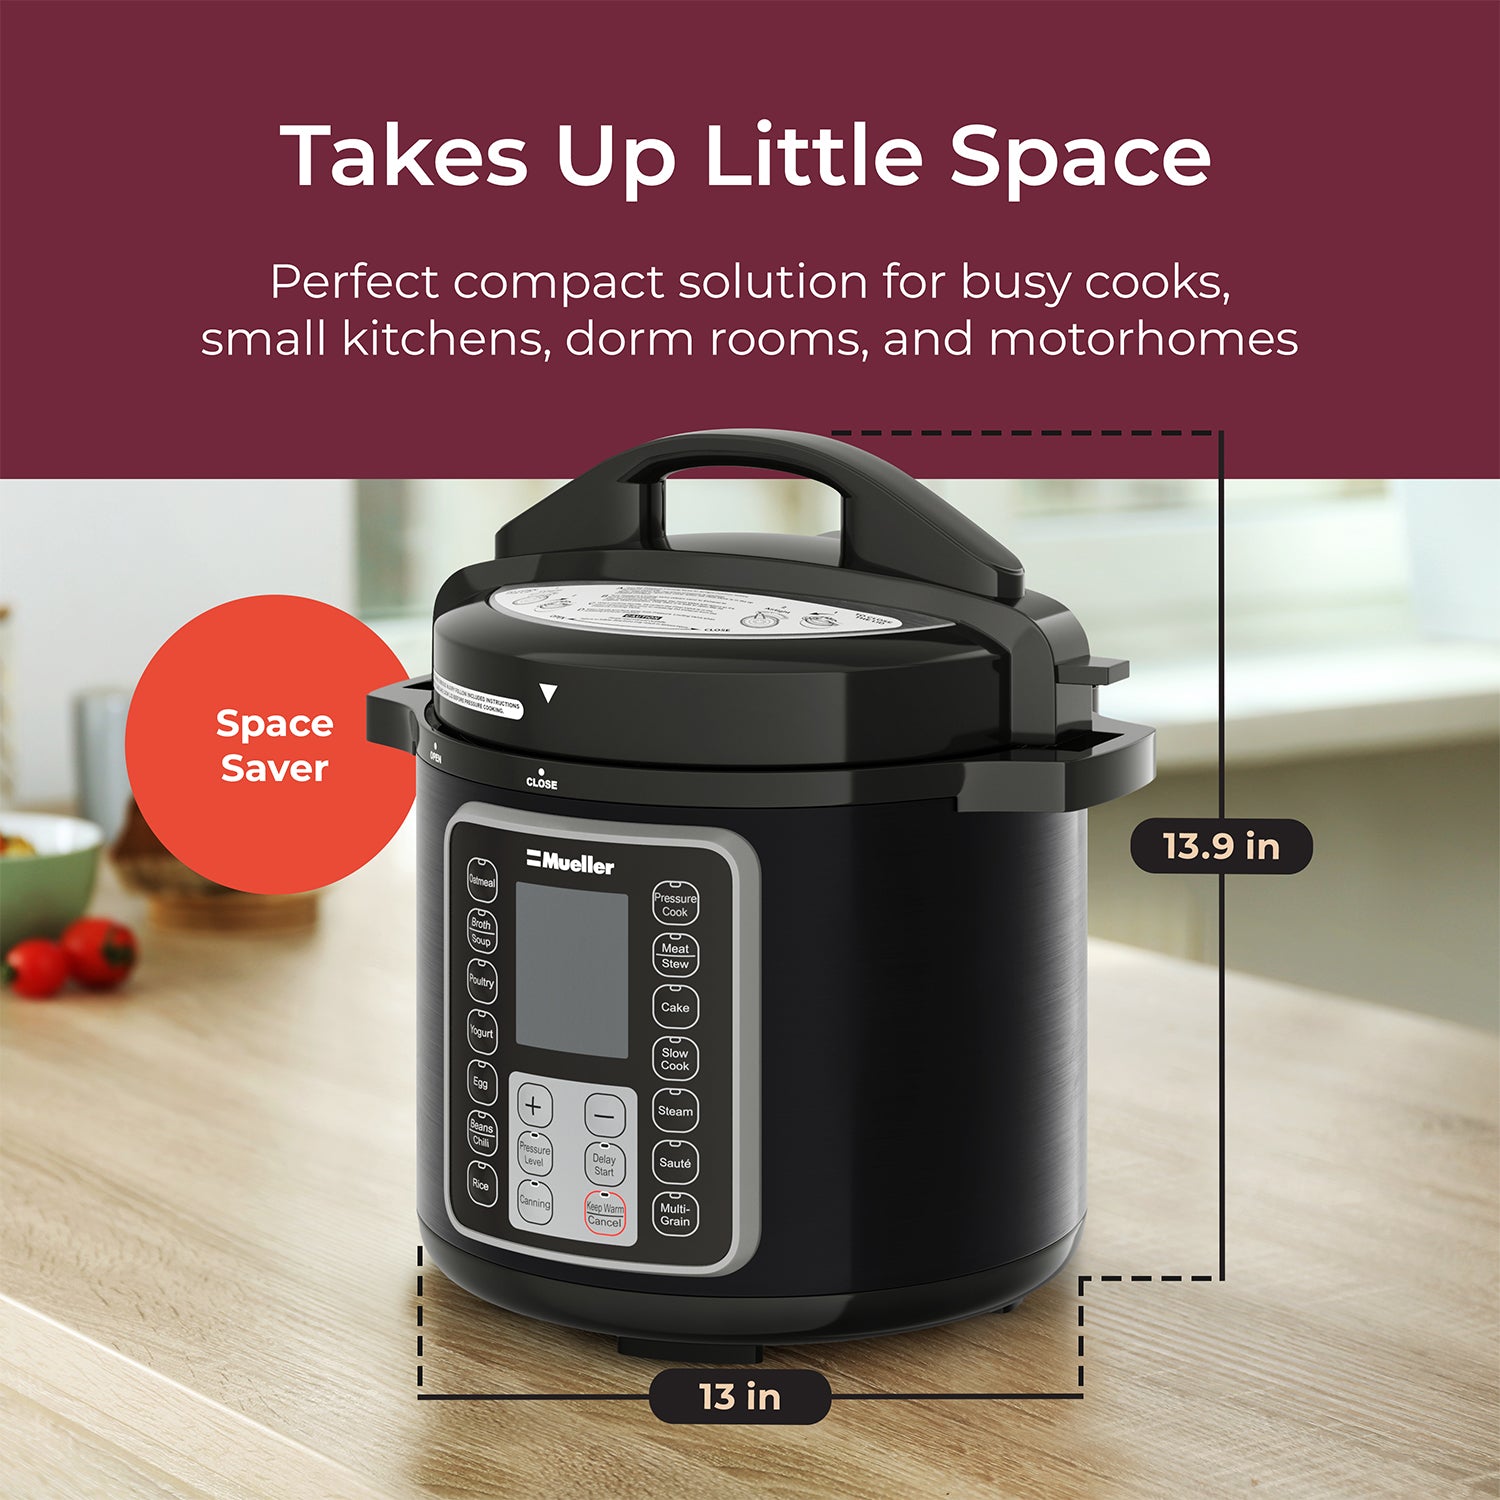 Mueller UltraPot 6Q Pressure Cooker Instant Crock 10 in 1 Pot with German  ThermaV Tech, Cook 2 Dishes at Once, BONUS Tempered Glass Lid incl, Saute,  Steamer, Slow, Rice, Yogurt, Maker, Sterilizer 